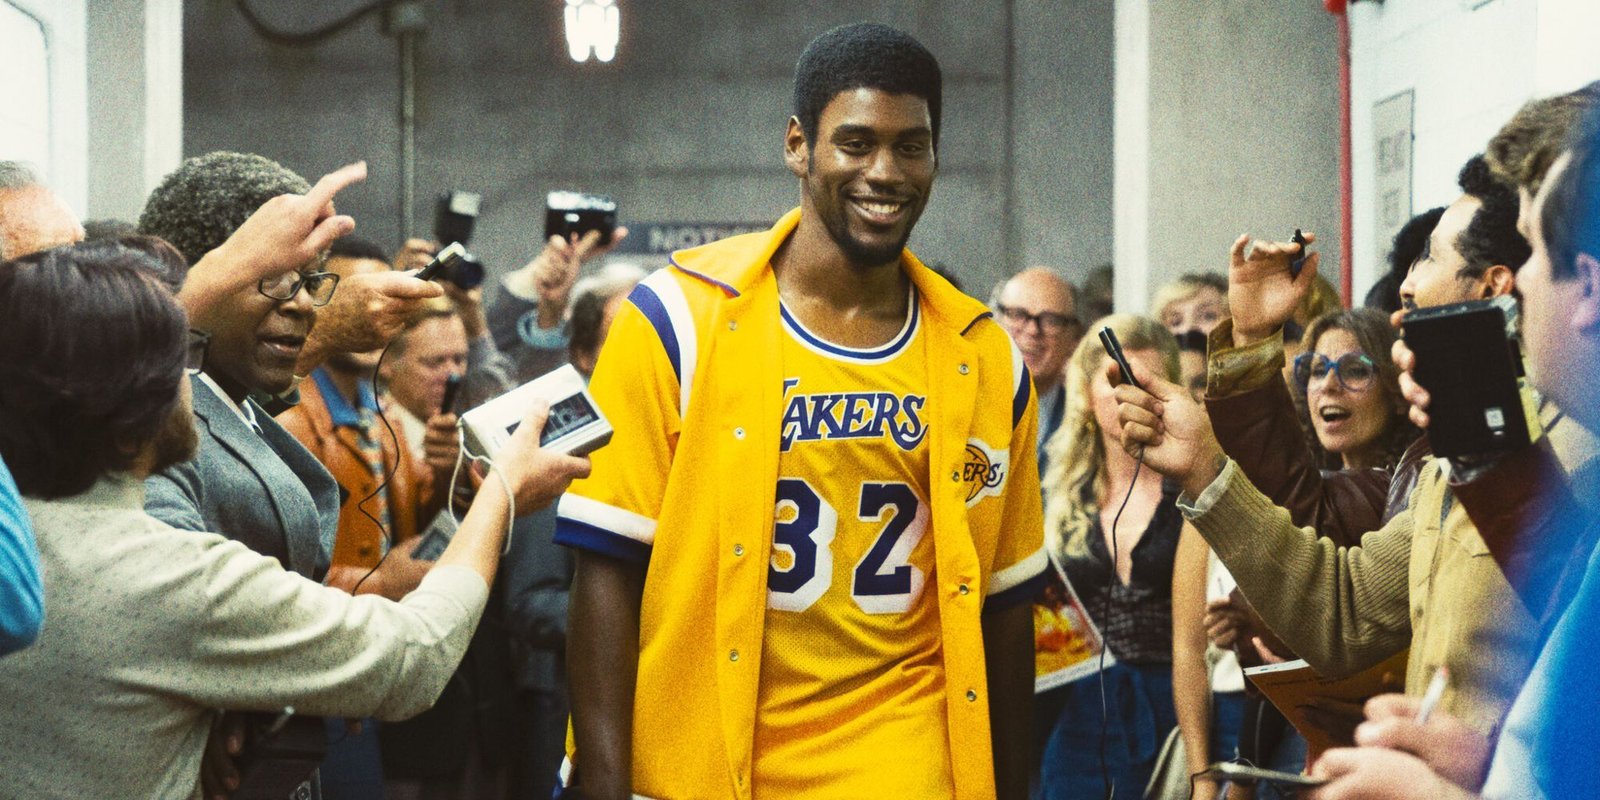 Quincy Isaiah as Magic Johnson in Winning Time